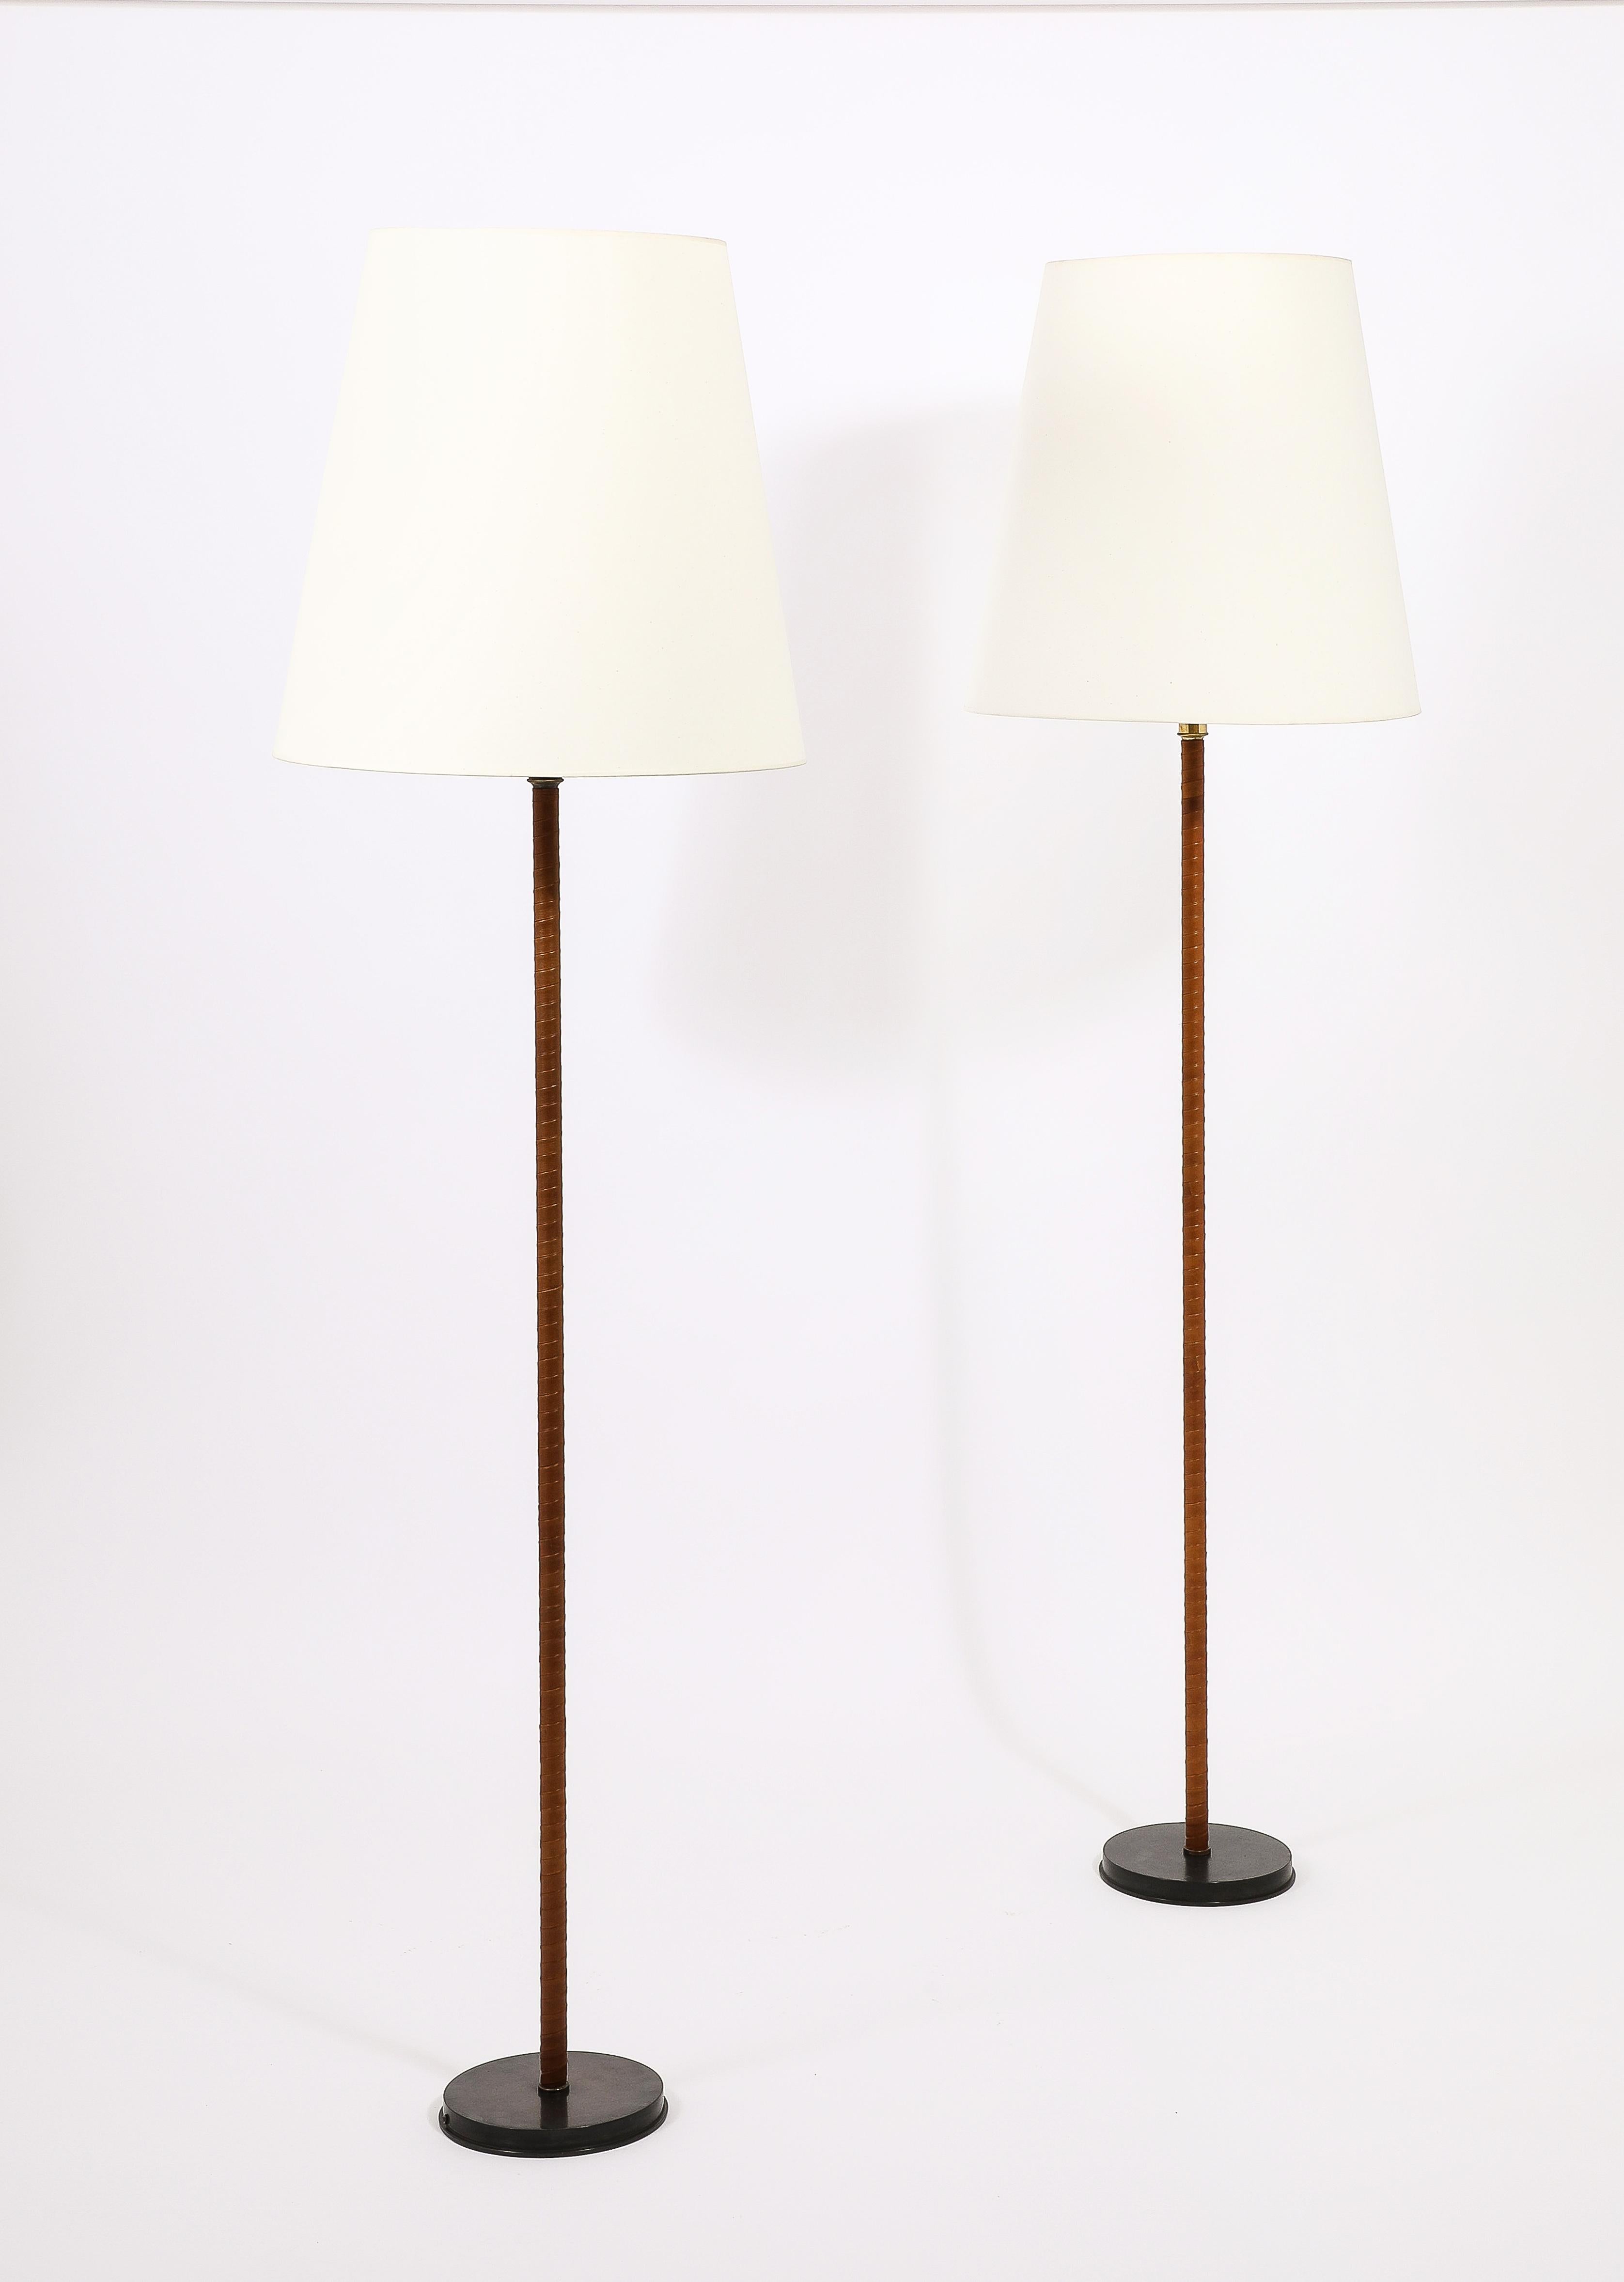 Spanish Bronze & Twist Leather Wrapped Floor Lamps, Spain 1950's For Sale